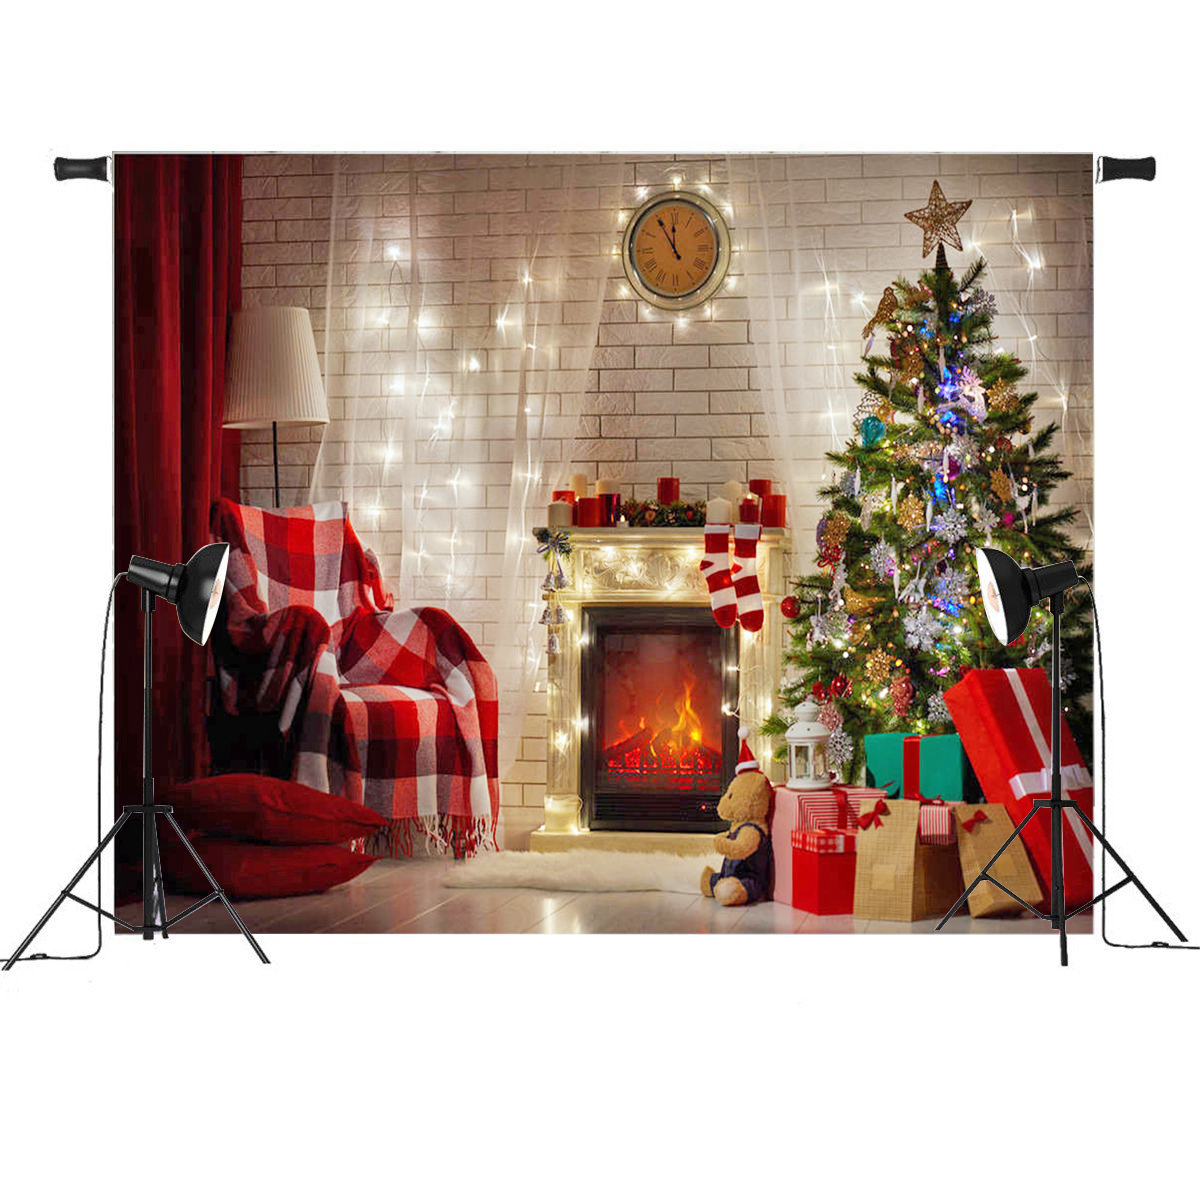 

7x5FT Red Christmas Tree Gift Chair Fireplace Photography Backdrop Studio Prop Background